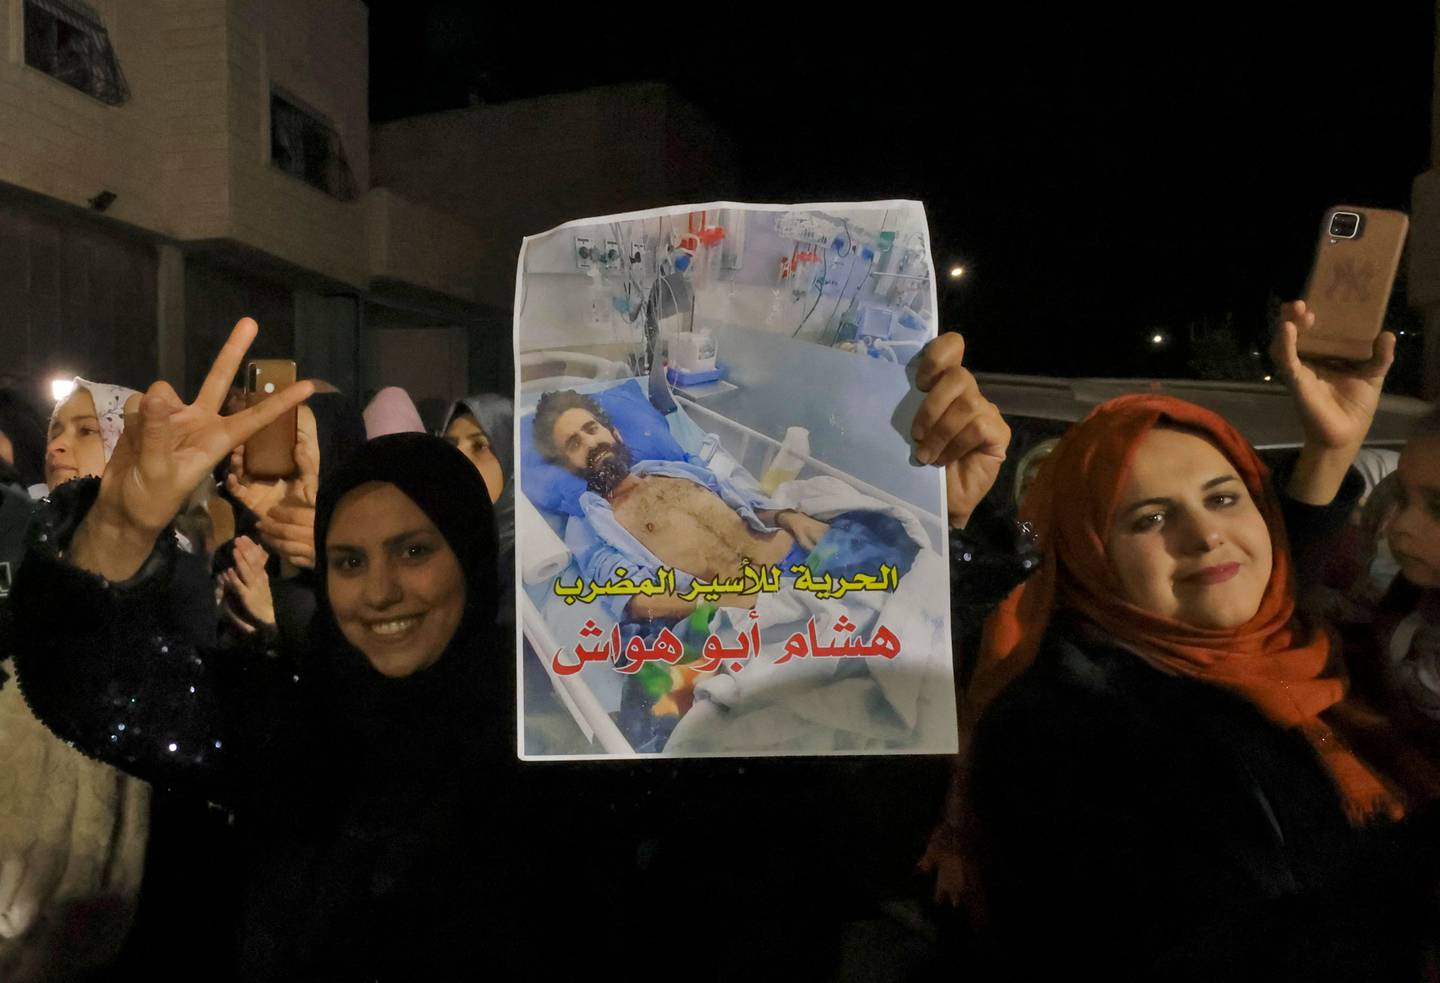 Palestinians gather outside the house of Hisham Abu Hawash, after he ended his hunger strike, on January 4. AFP